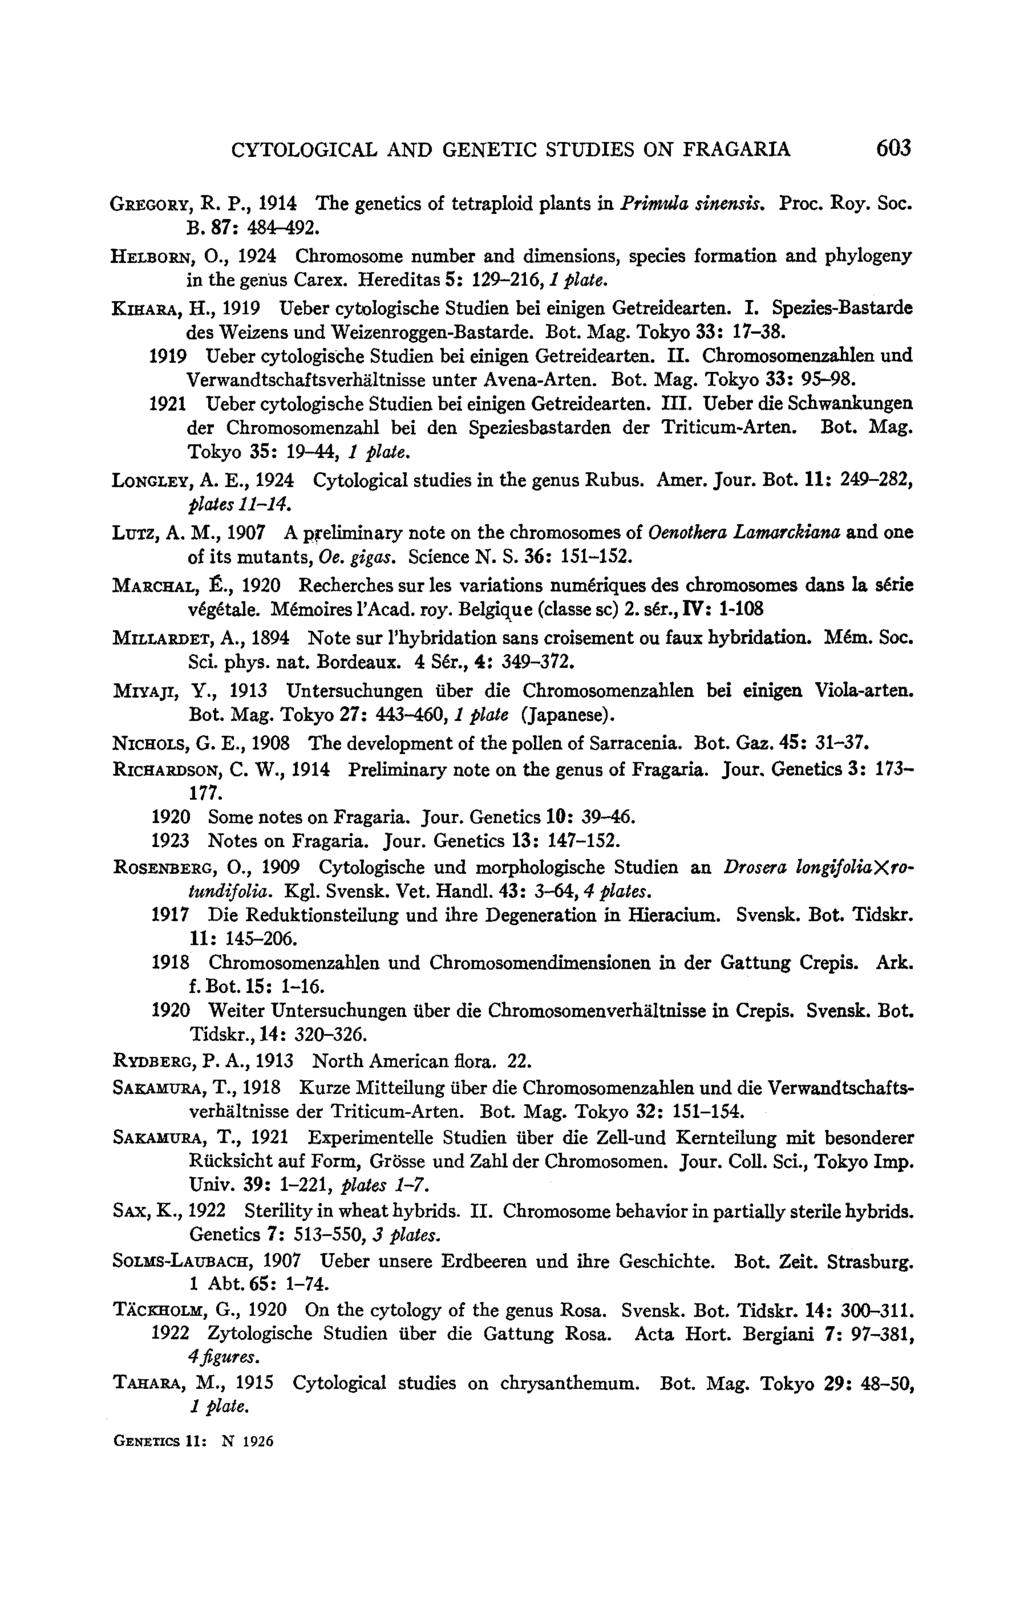 CYTOLOGICAL AND GENETIC STUDIES ON FRAGARIA 603 GREGORY, R. P., 1914 The genetics of tetraploid plants in Prinzda sinensis. Proc. Roy. Soc. B. 87: 484-492. HELBORN, O.